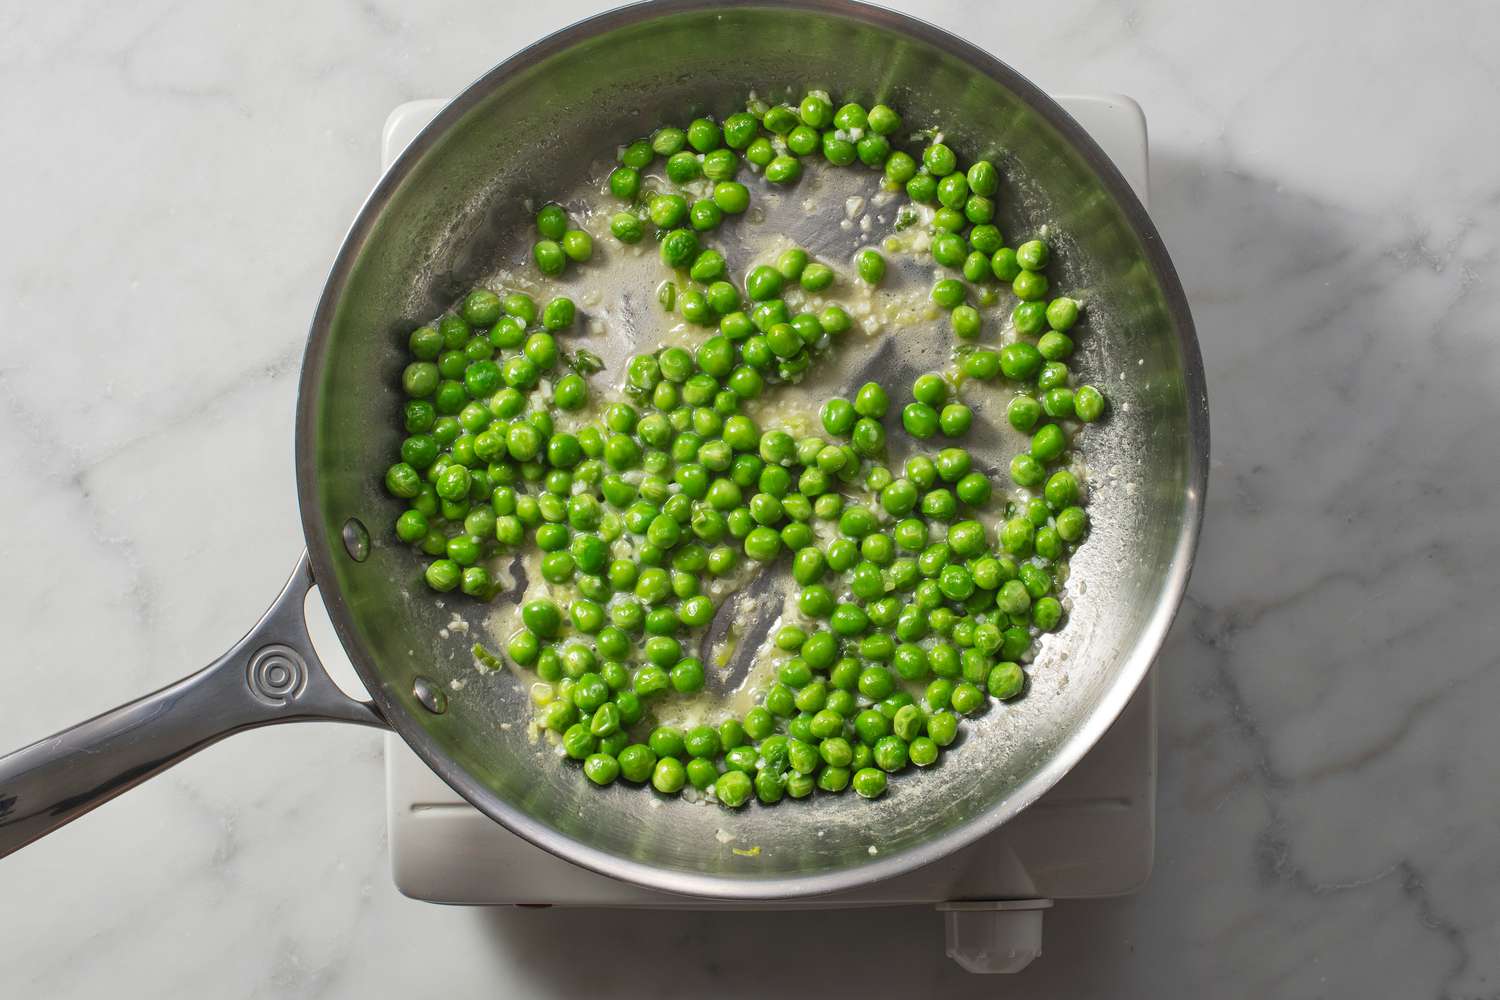 Water added to the pan of cooking peas